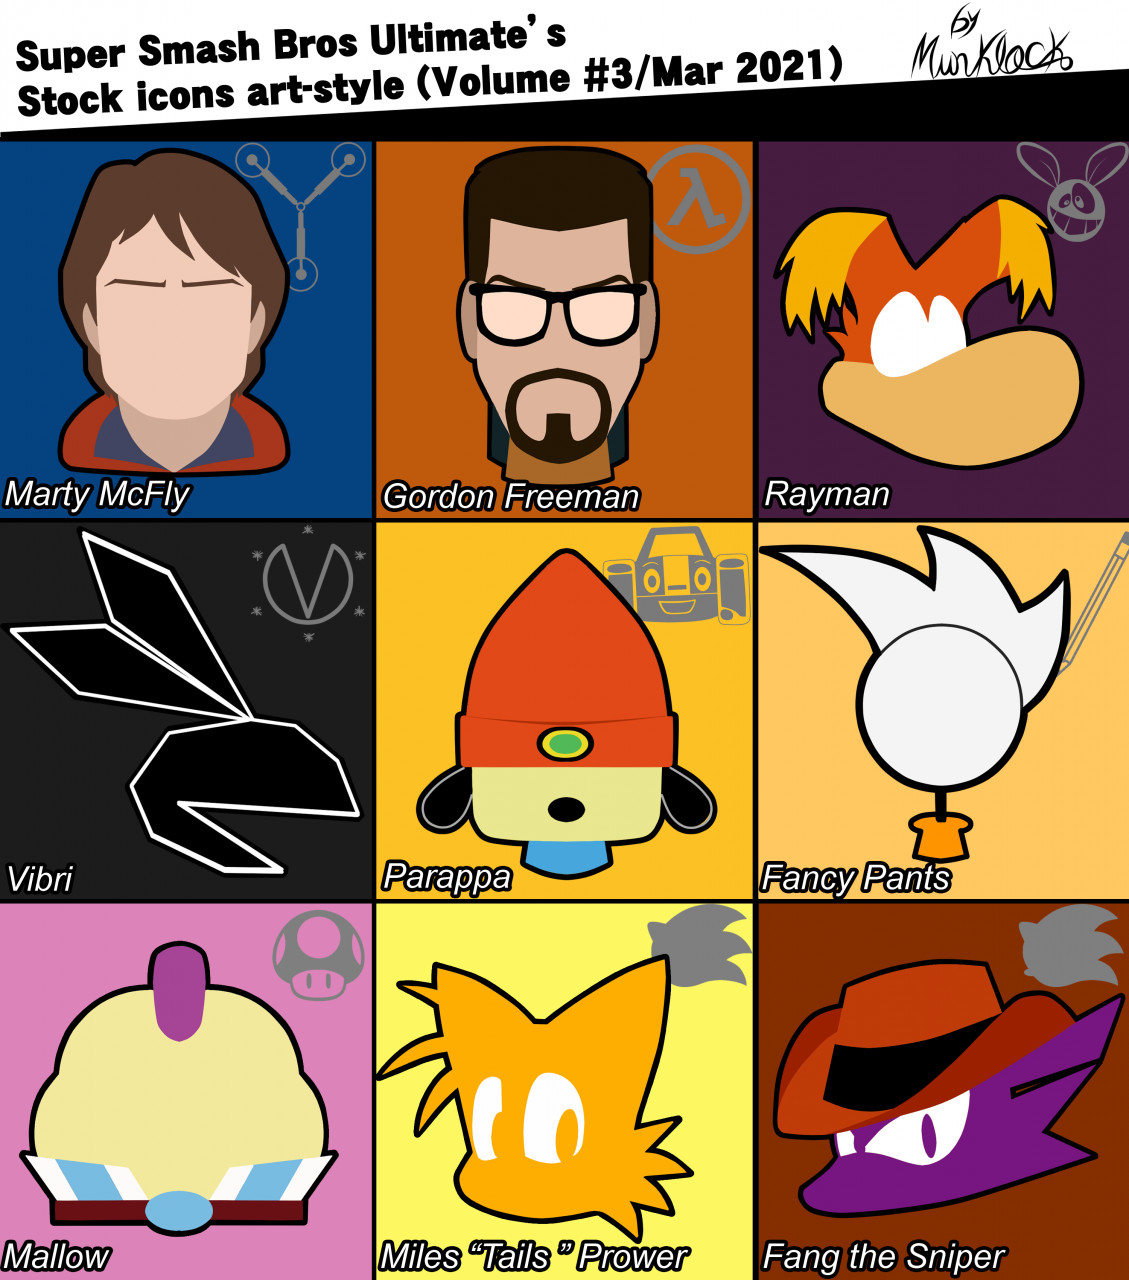 Super Smash Bros Ultimate's stock icons (Vol.3) by Rockwolf012